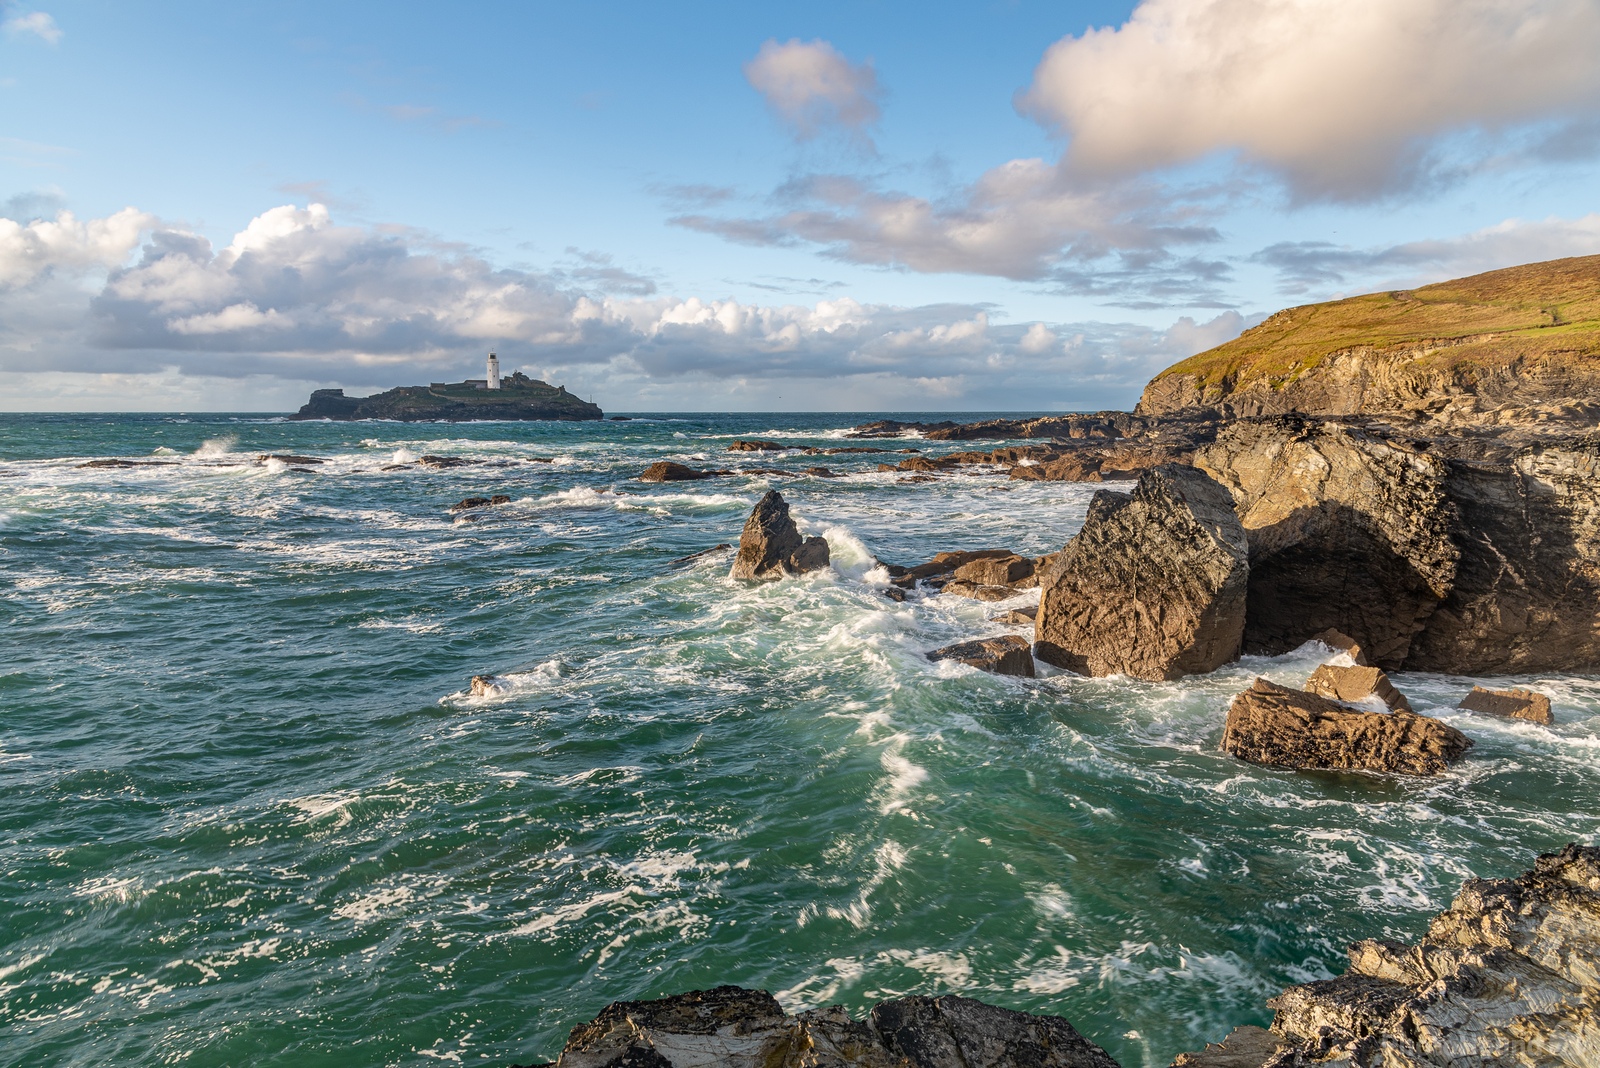 Image of Godrevy Lighthouse by Martin Stubbings